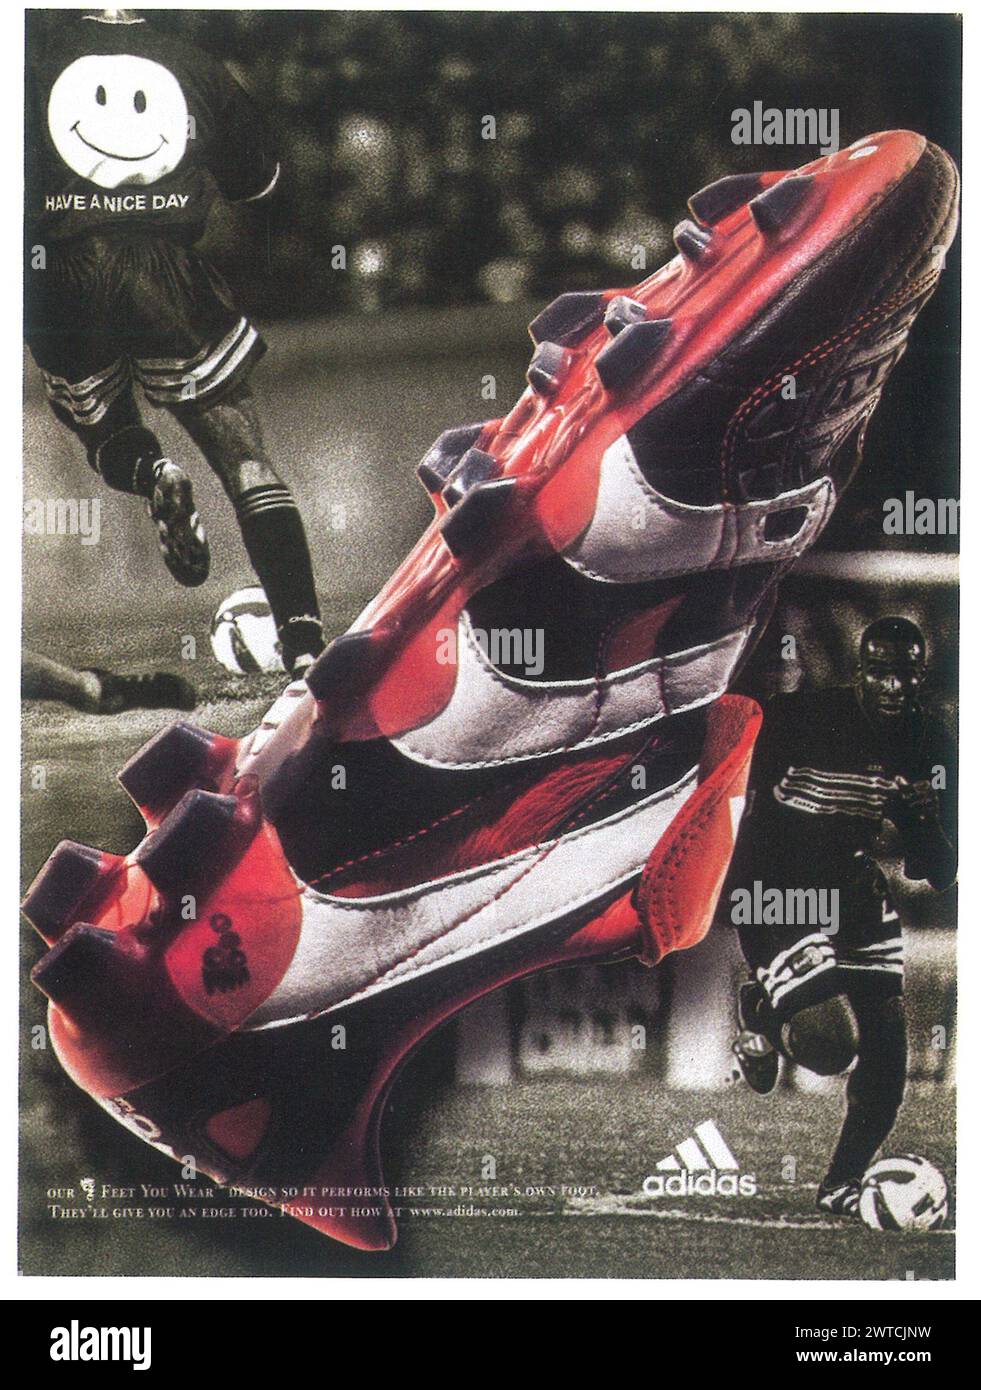 1998 homme Adidas Chaussures de football ad Banque D'Images